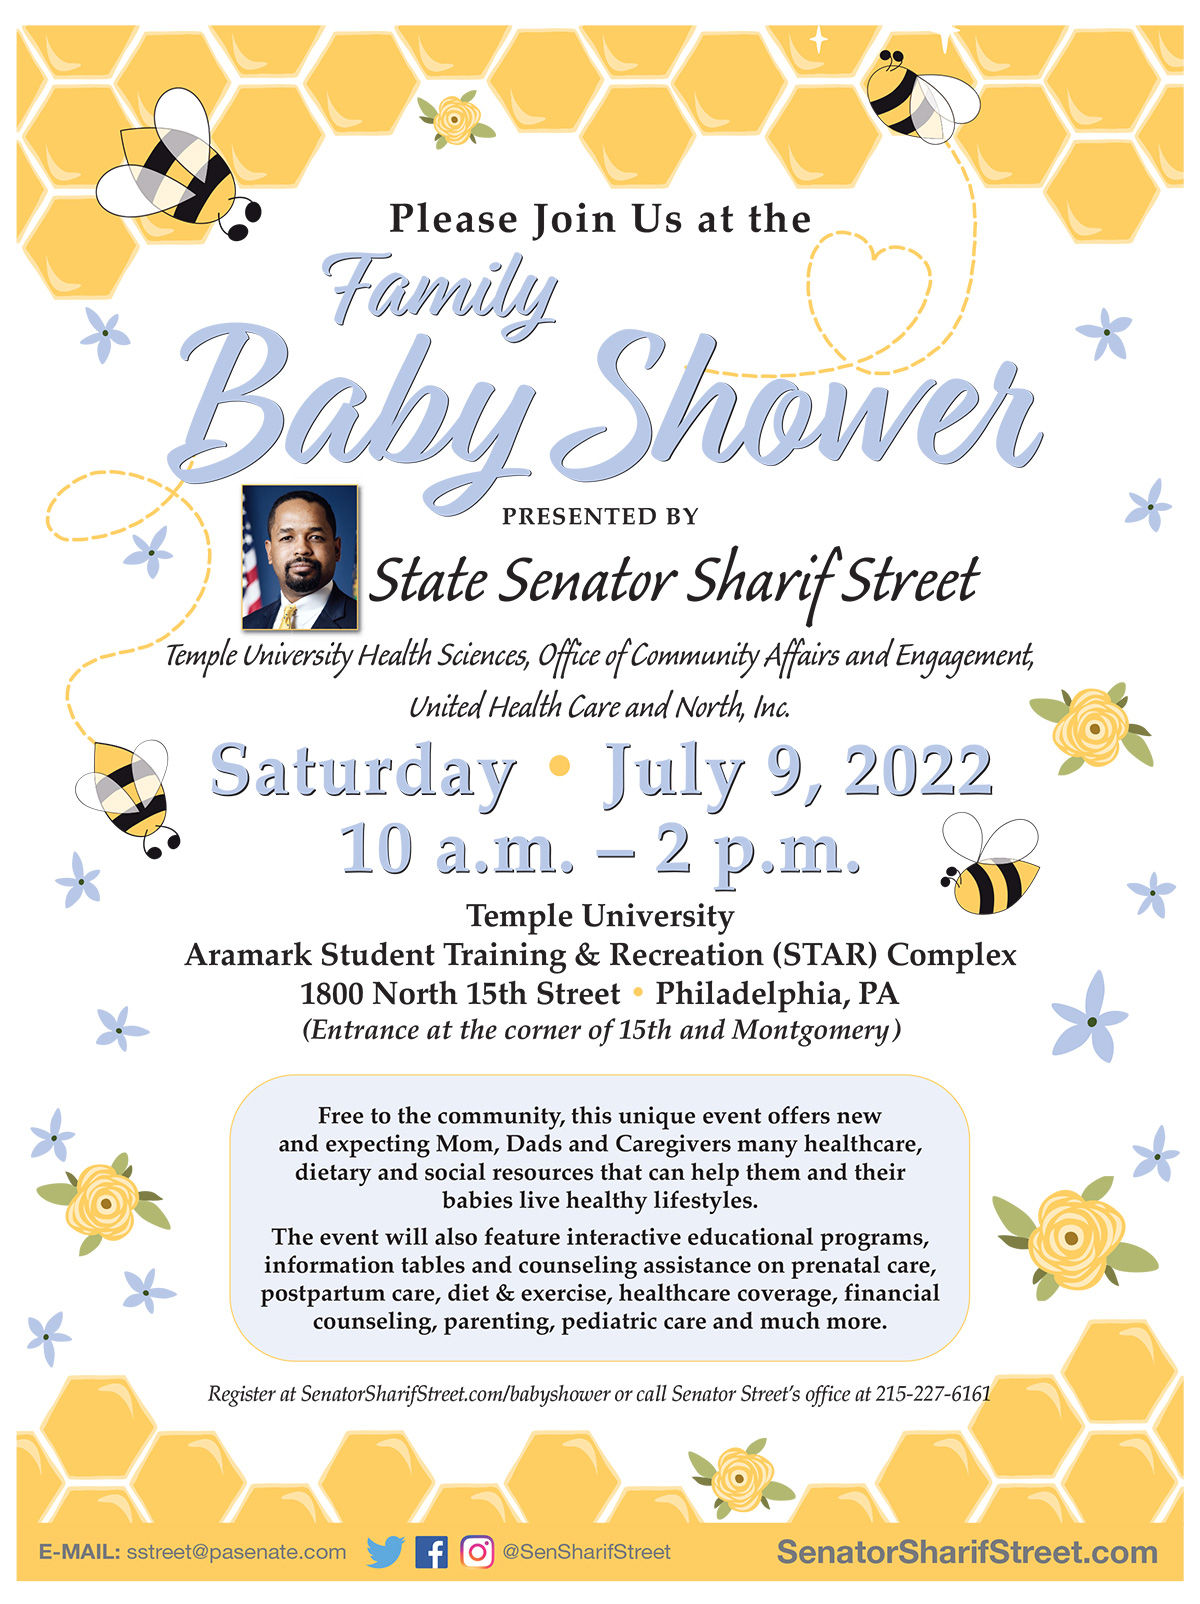 Family Baby Shower - July 9, 2022